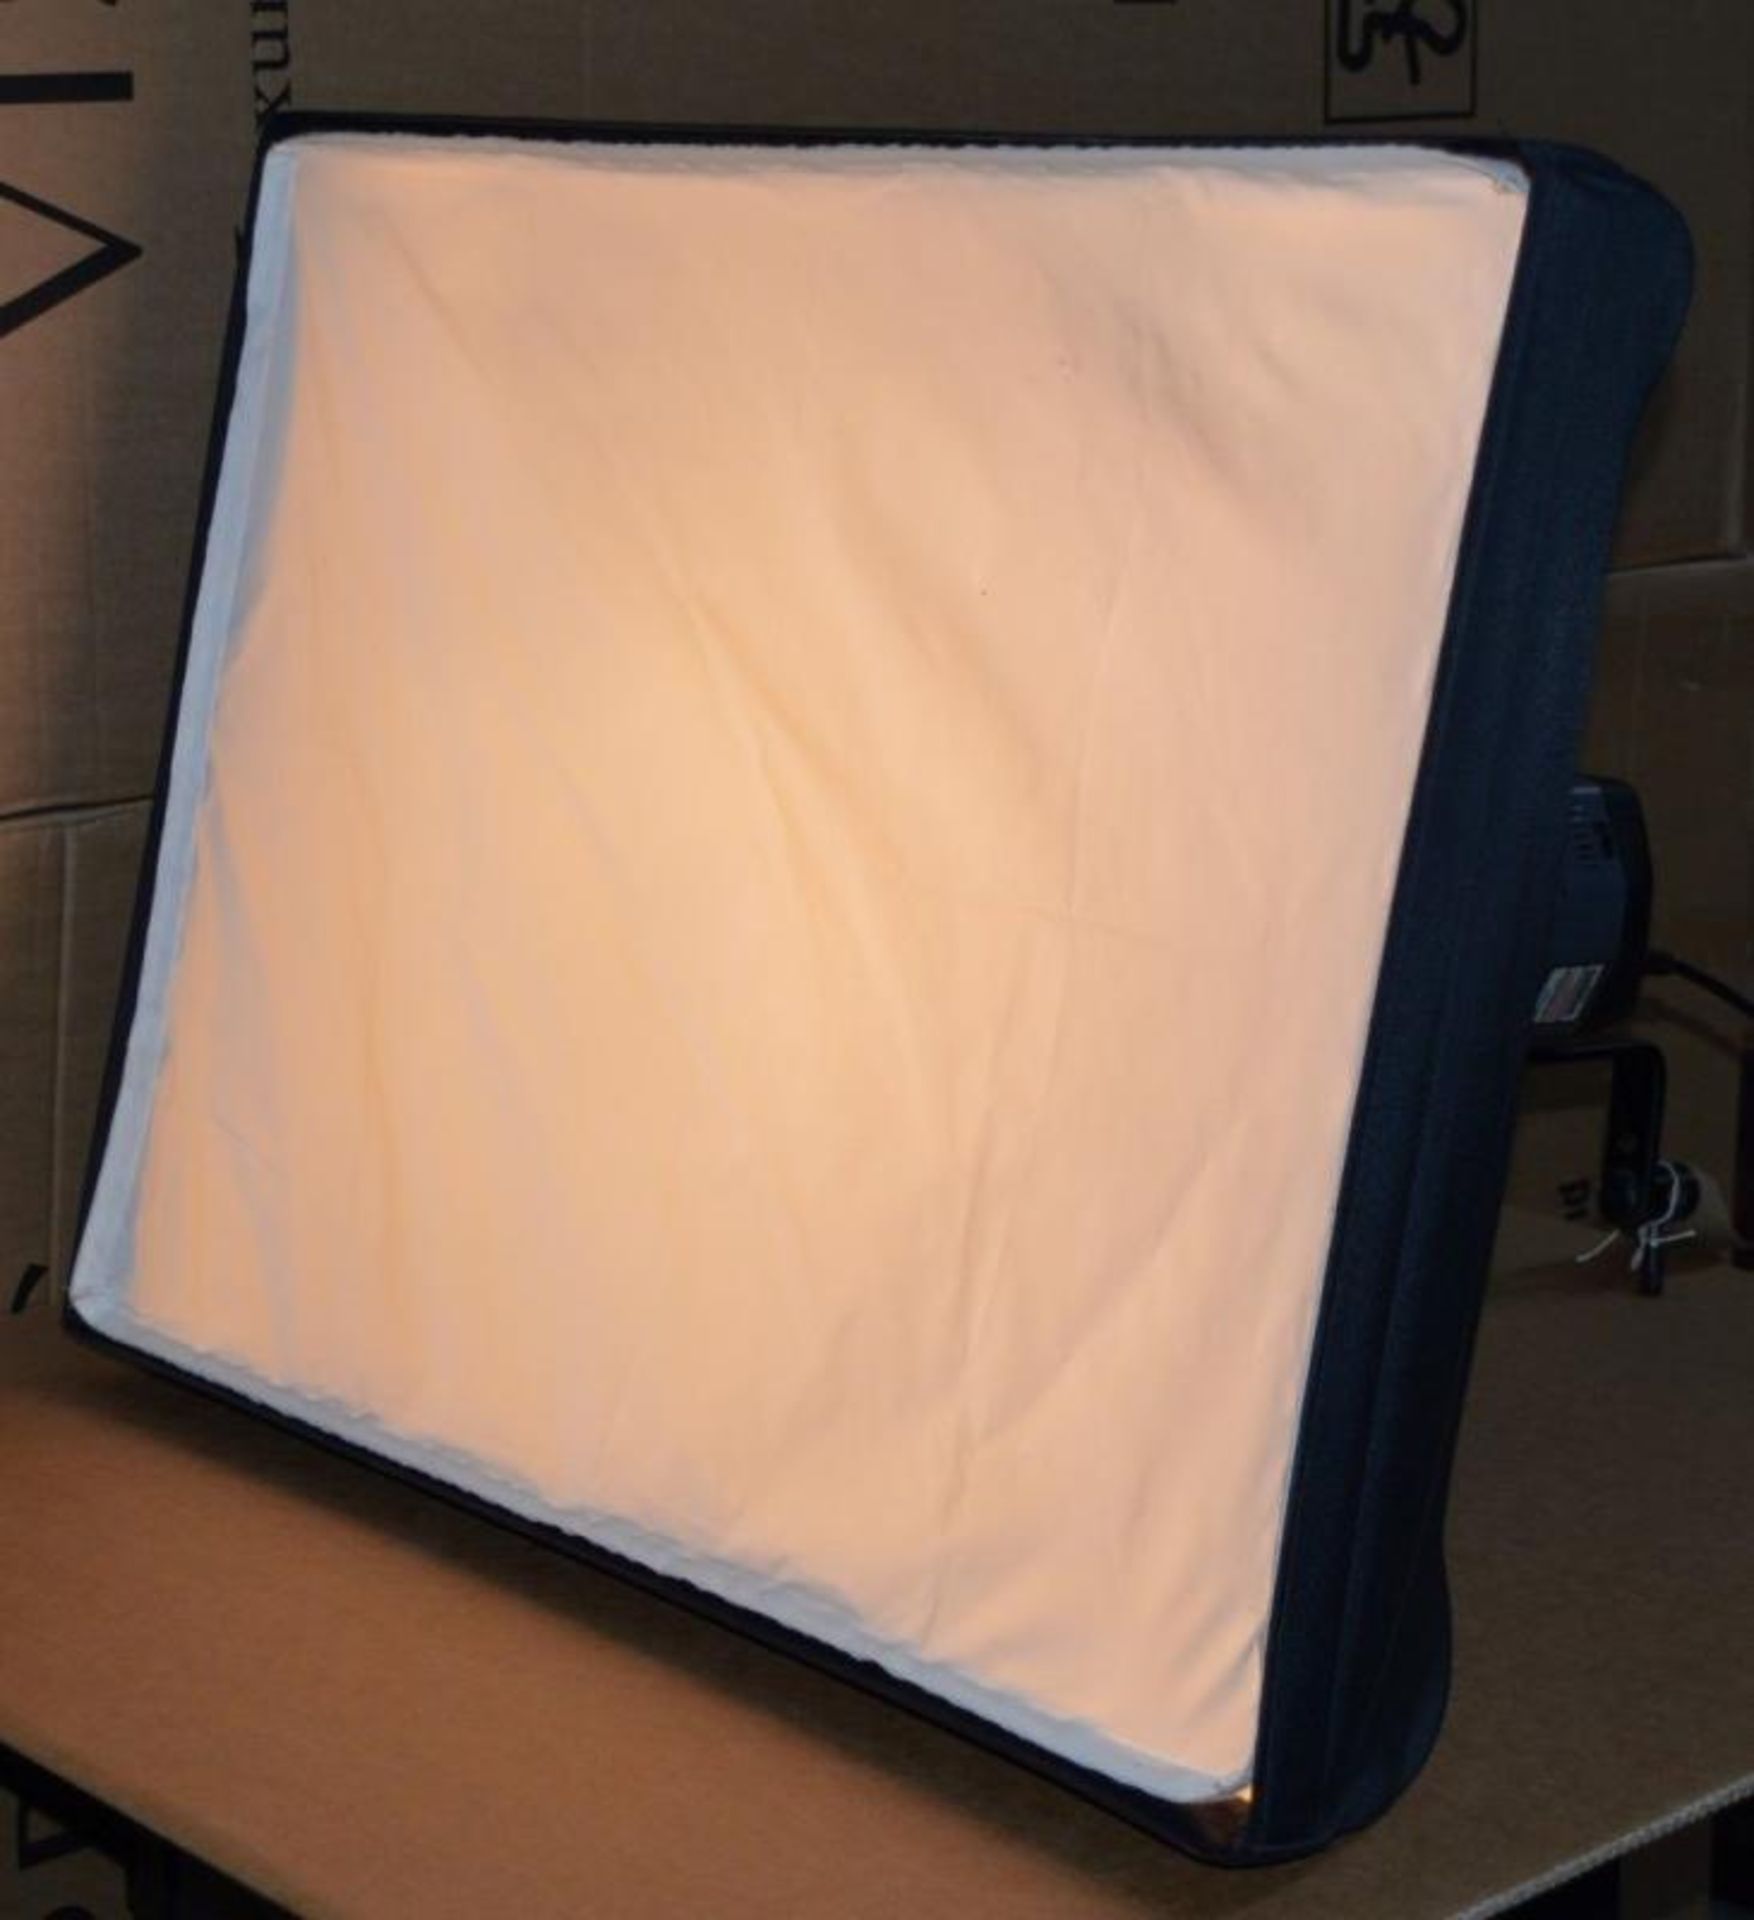 1 x Bowens Flash Light Wafer Softbox - Professional Photography Equipment - Good Condition - Include